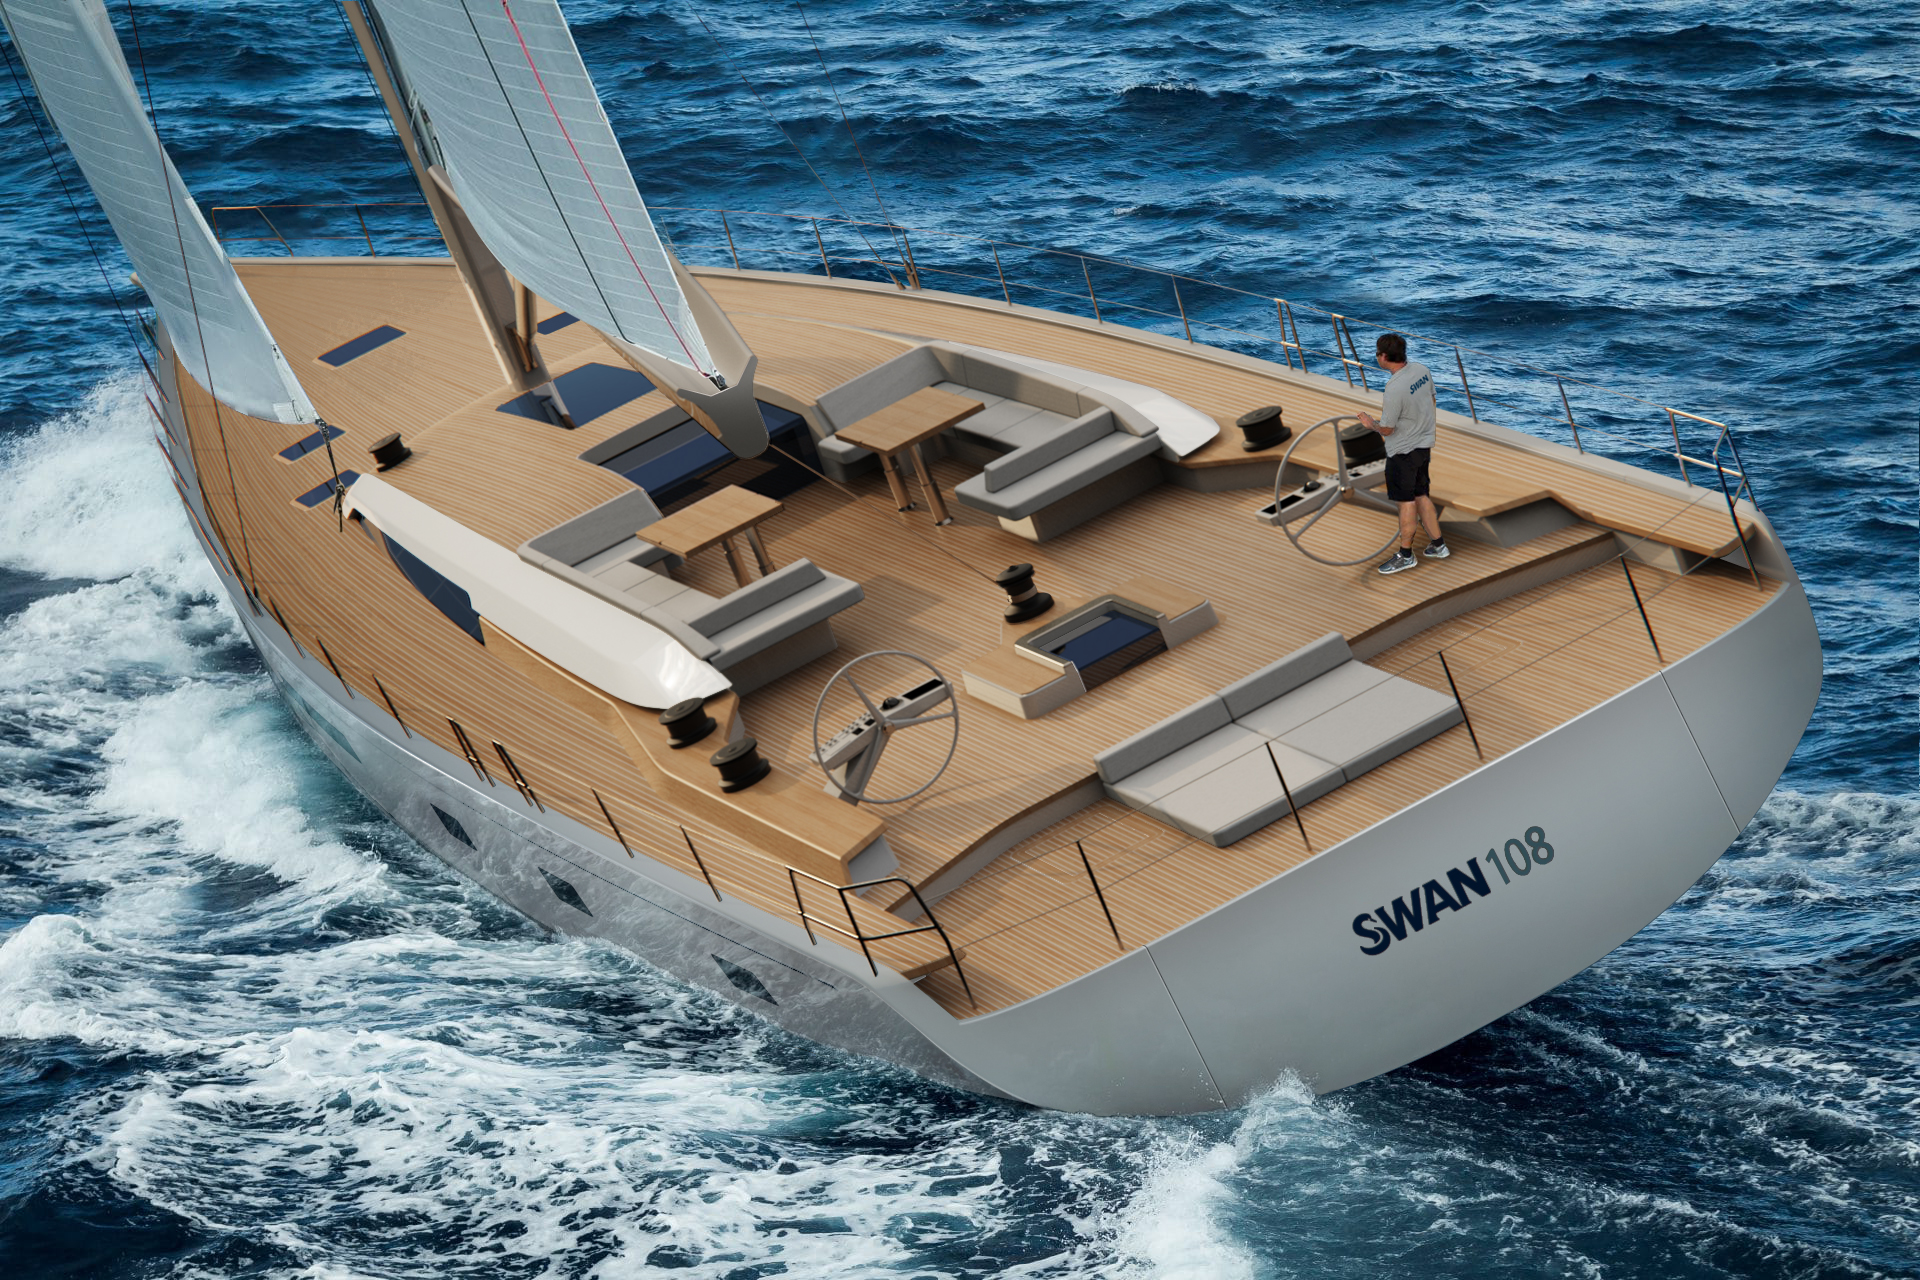 where are swan yachts built